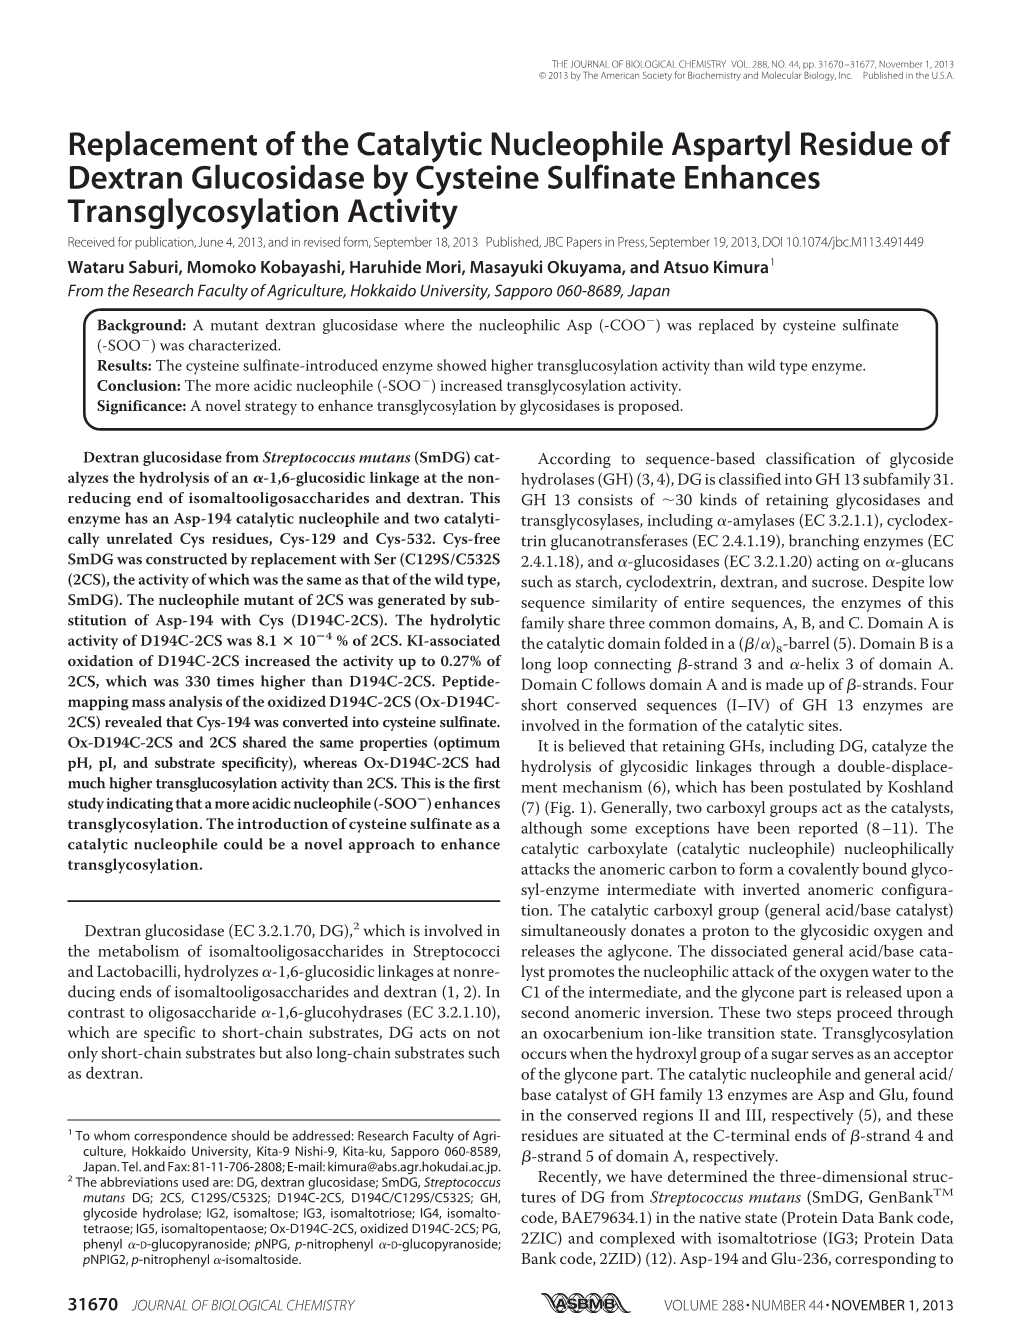 Replacement of the Catalytic Nucleophile Aspartyl Residue of Dextran Glucosidase by Cysteine Sulfinate Enhances Transglycosylati